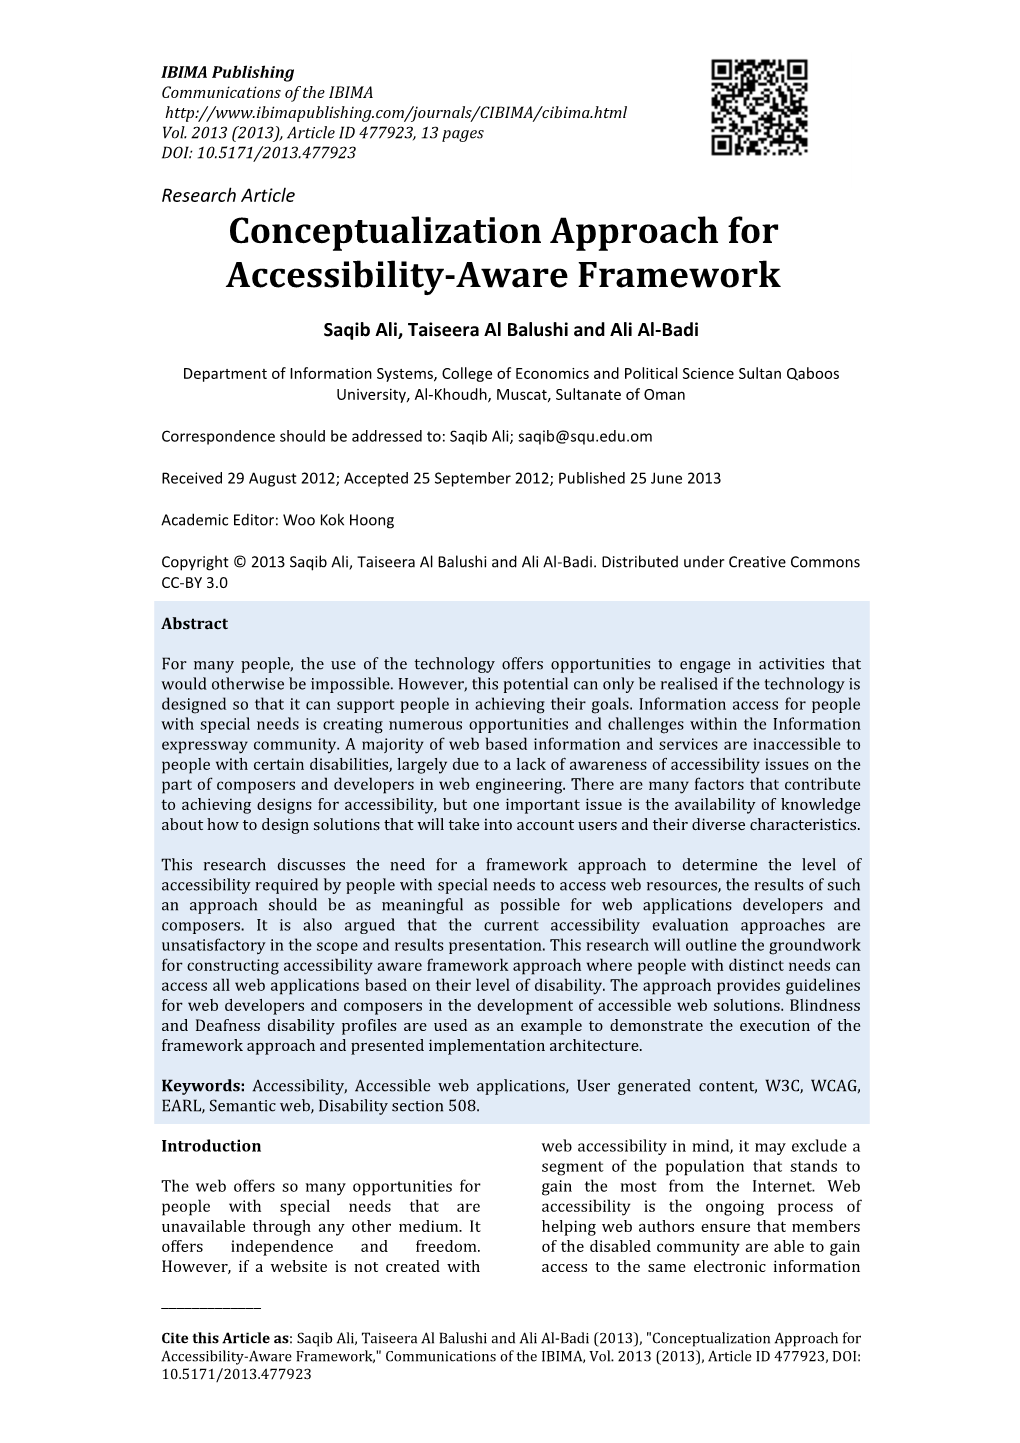 Conceptualization Approach for Accessibility-Aware Framework